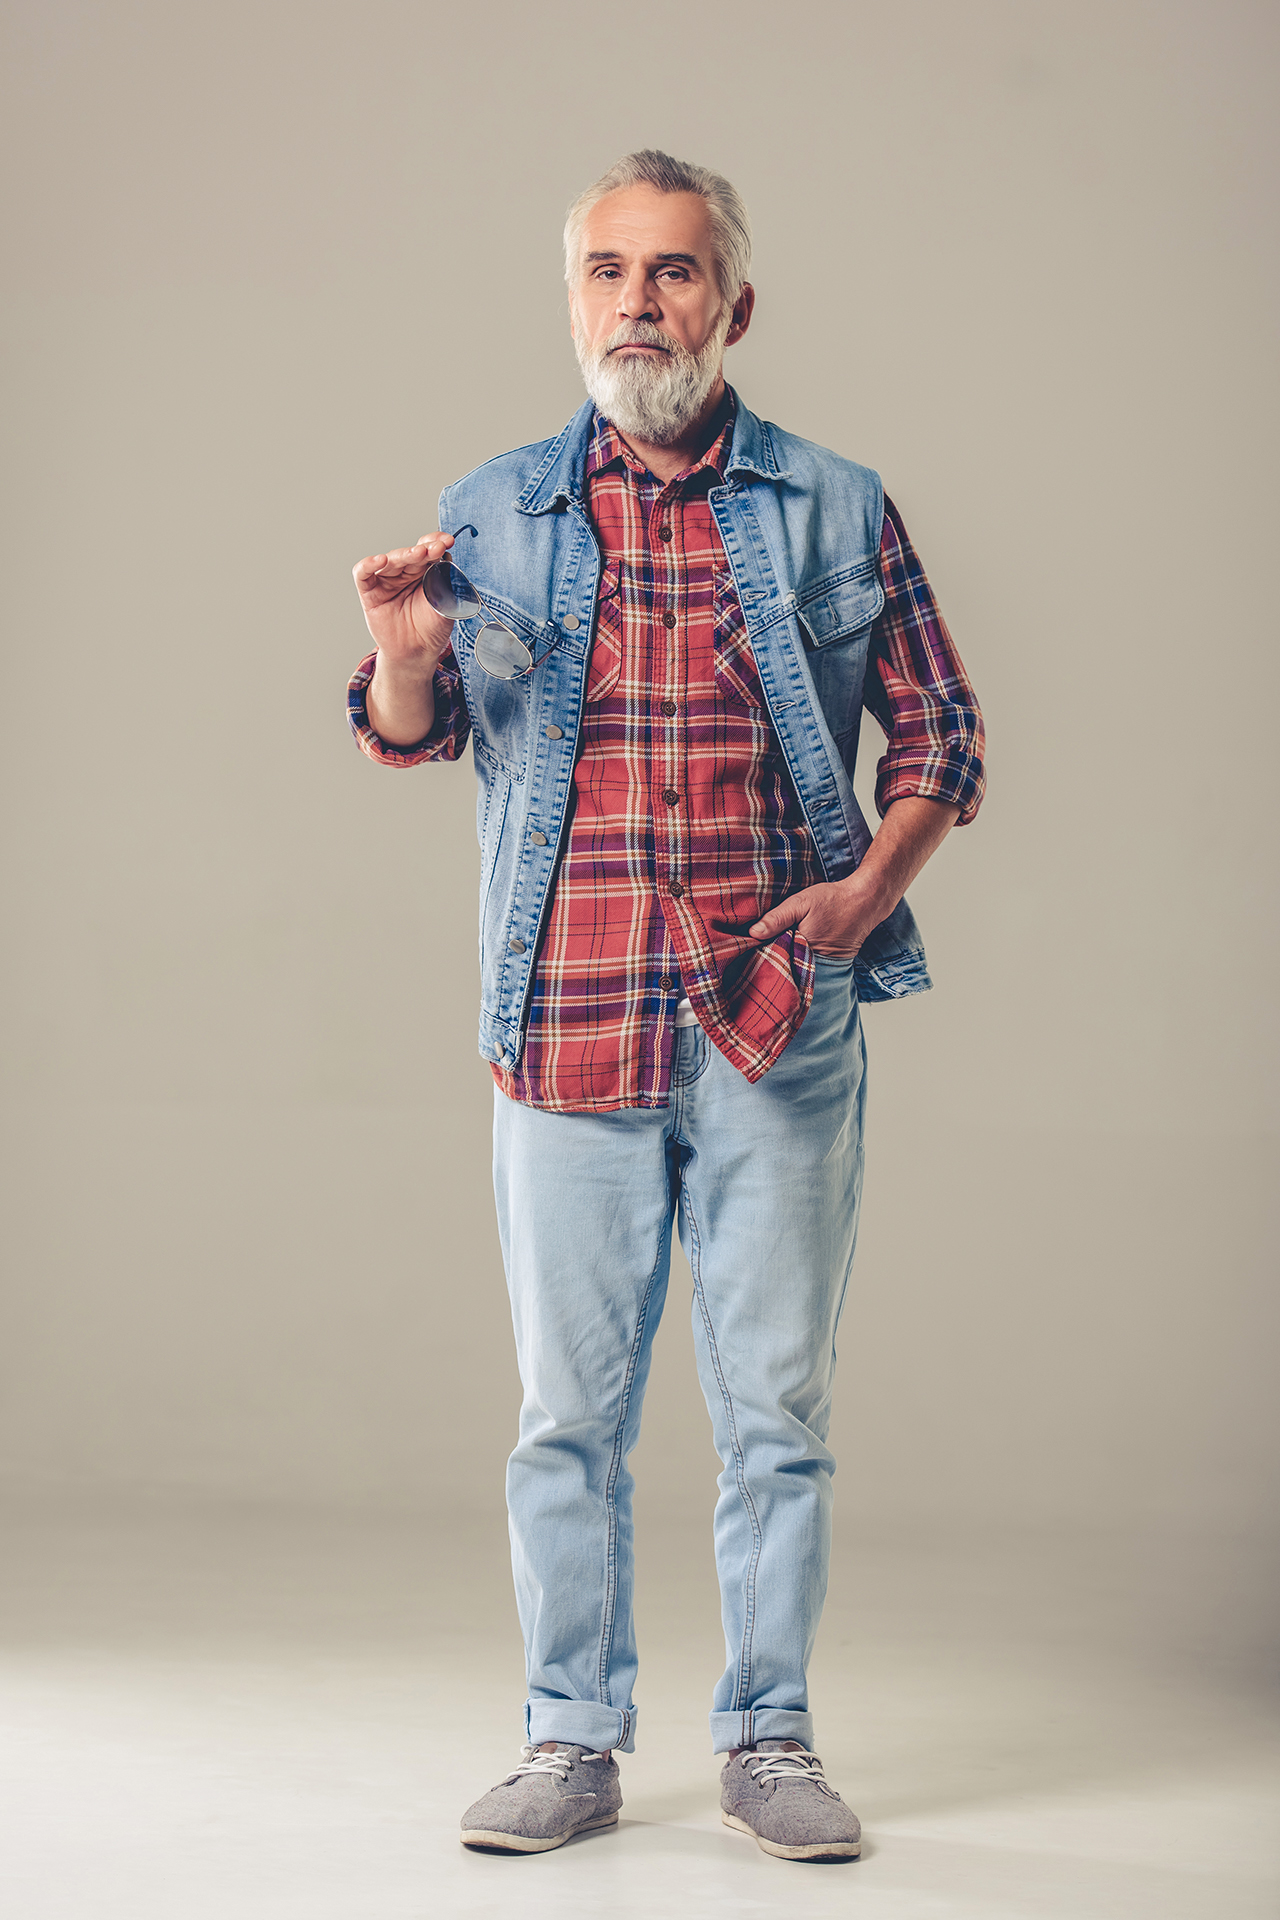 Casual attire sample for a man in his sixties